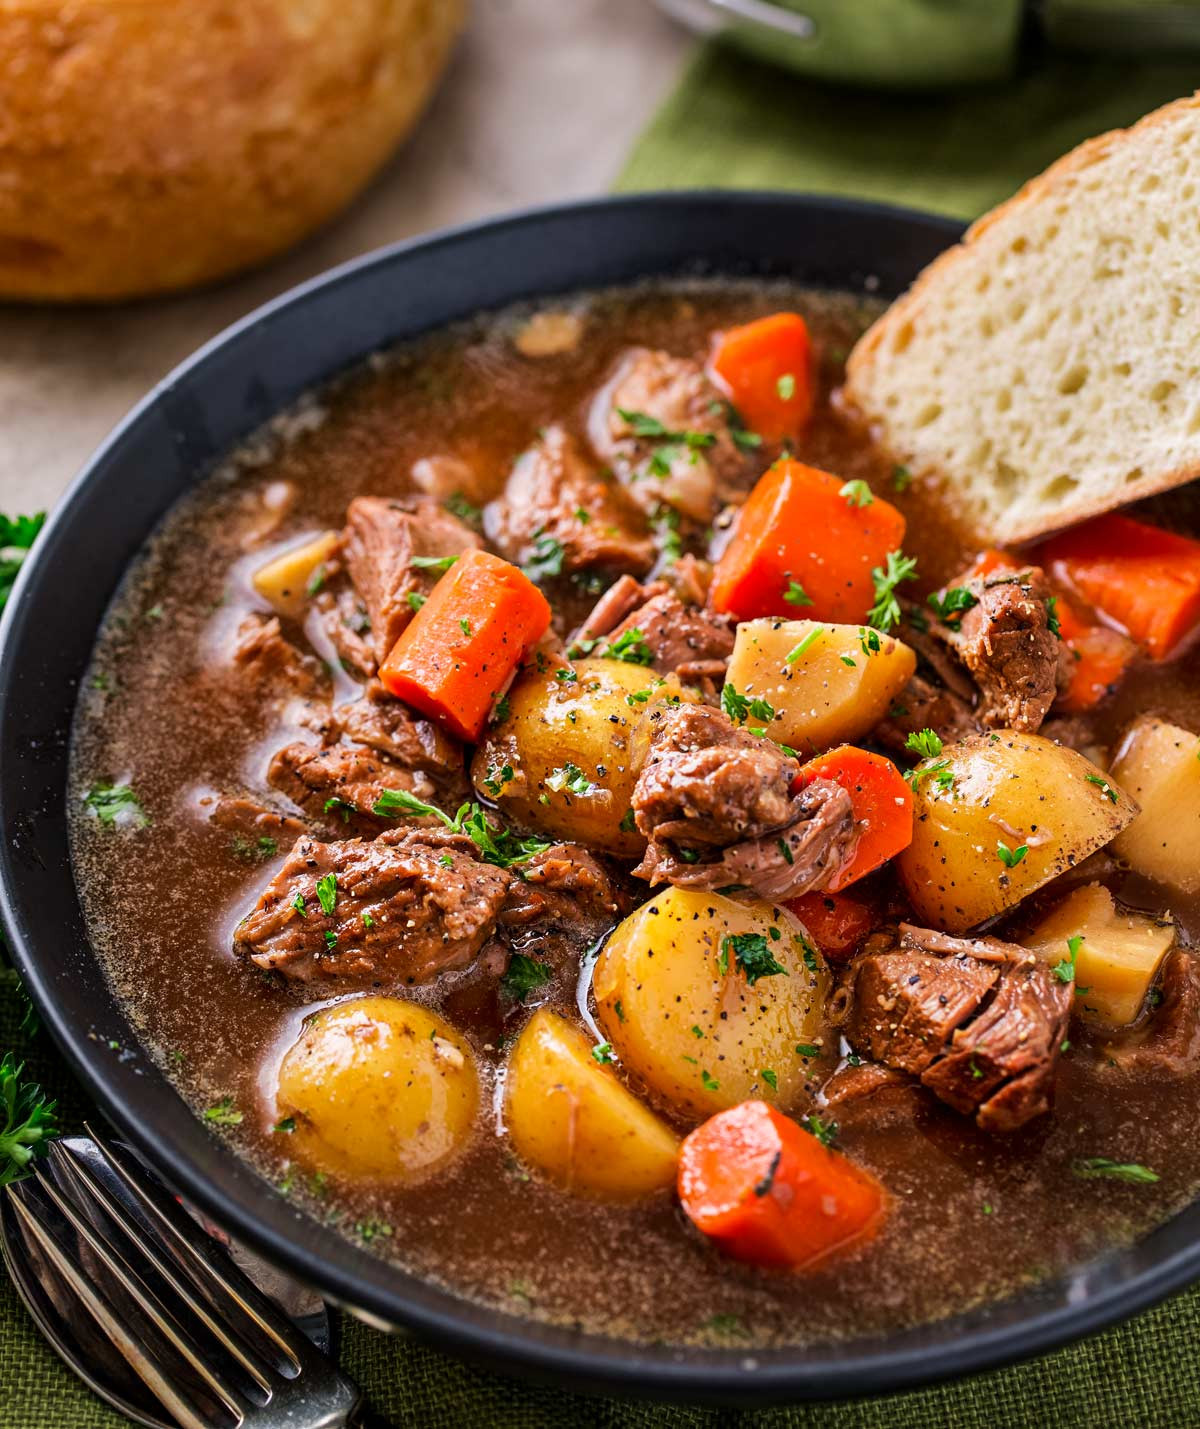 Crockpot Recipes For Beef Stew
 Crockpot Beef Stew with Beer and Horseradish The